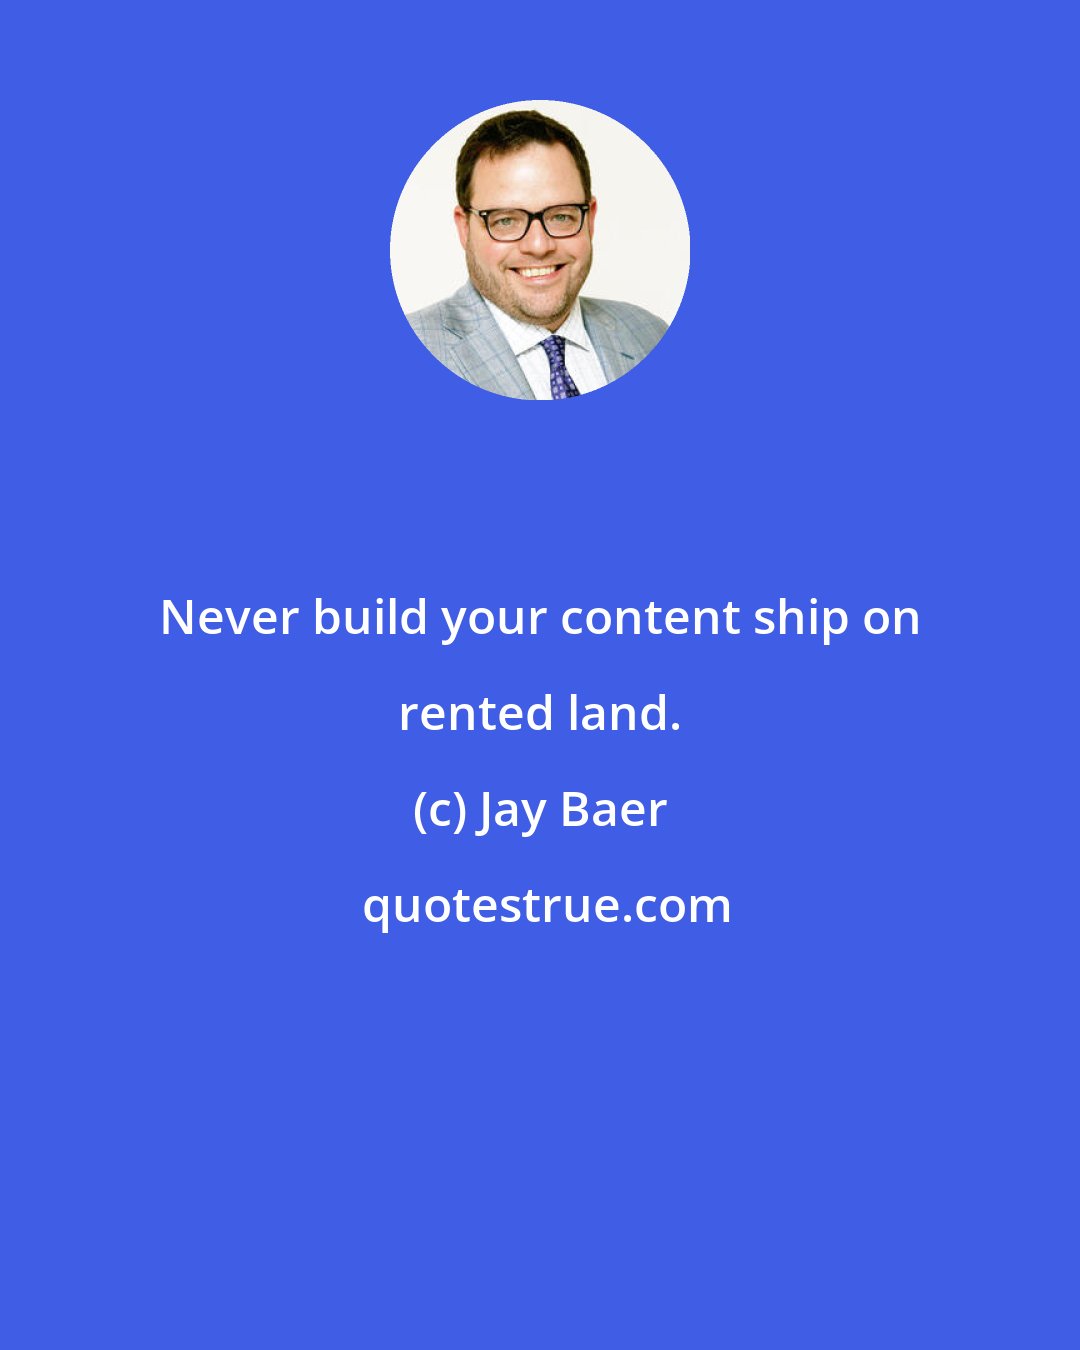 Jay Baer: Never build your content ship on rented land.